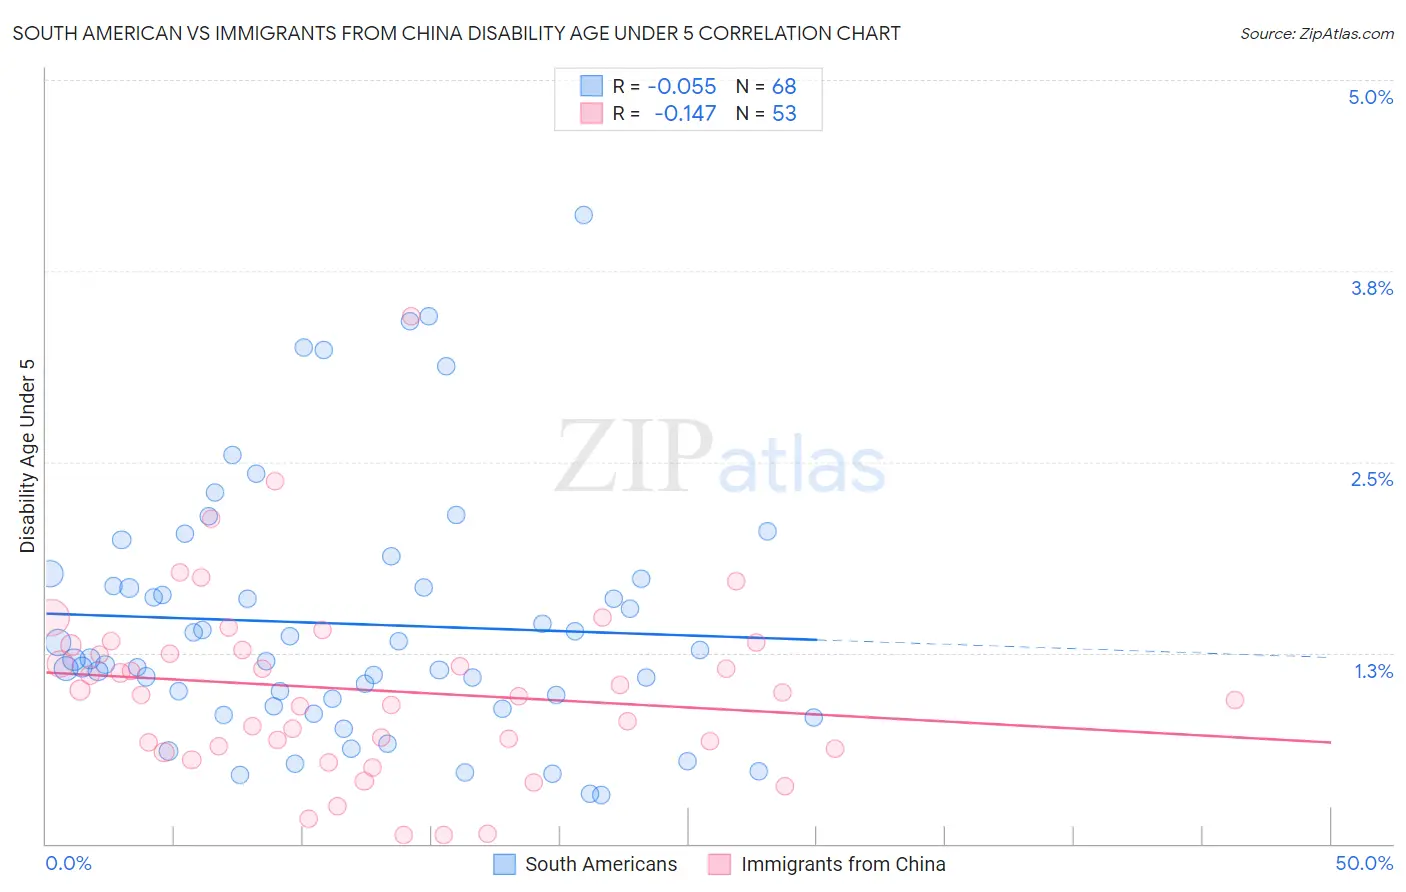 South American vs Immigrants from China Disability Age Under 5